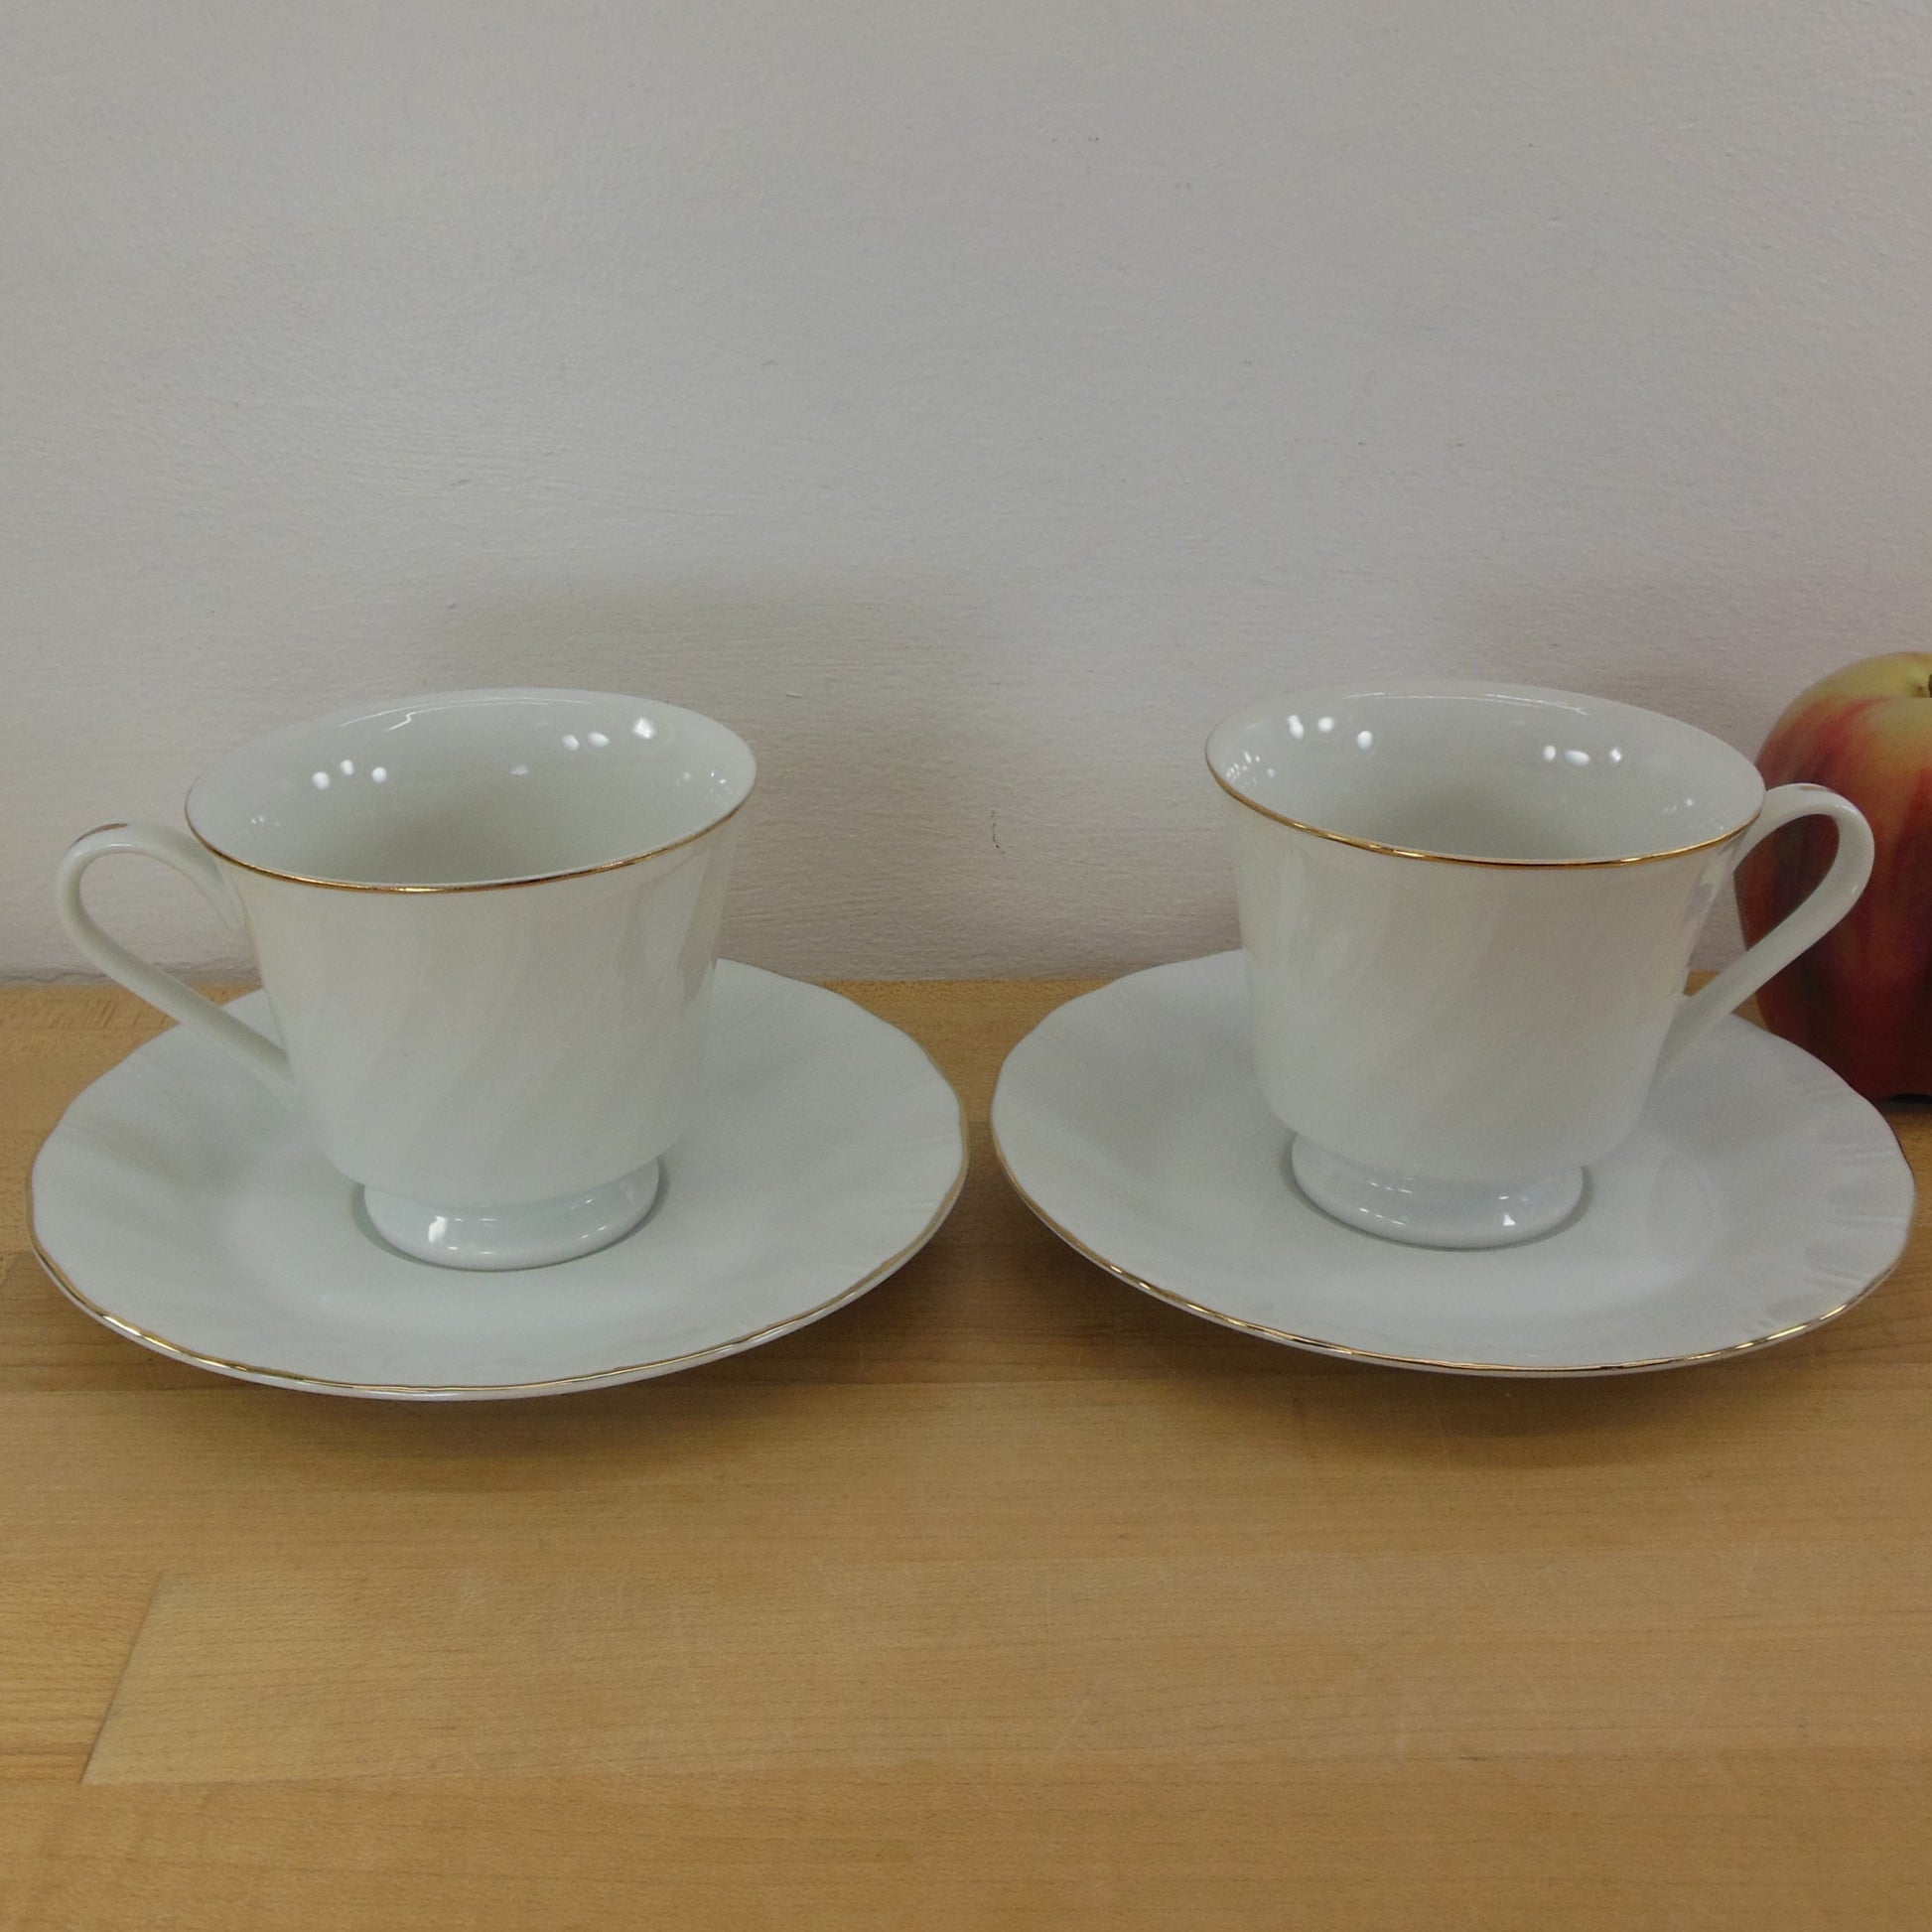 Gevalia Kaffe Swirl White Porcelain Gold Trim King Appointment - Cup & Saucer Pair 2s